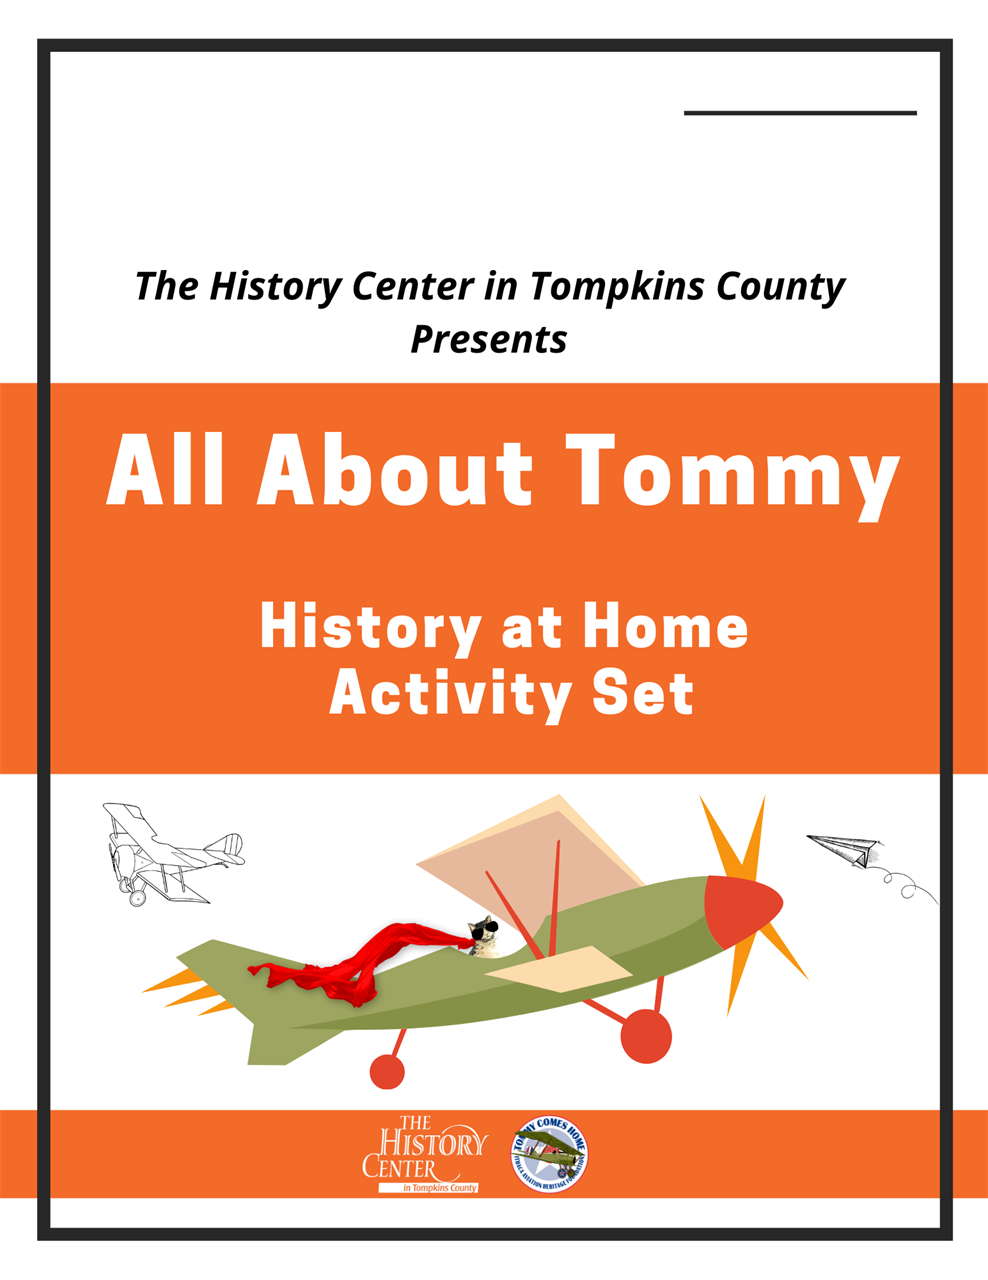 A small image of the "All About Tommy" History at Home activity set.